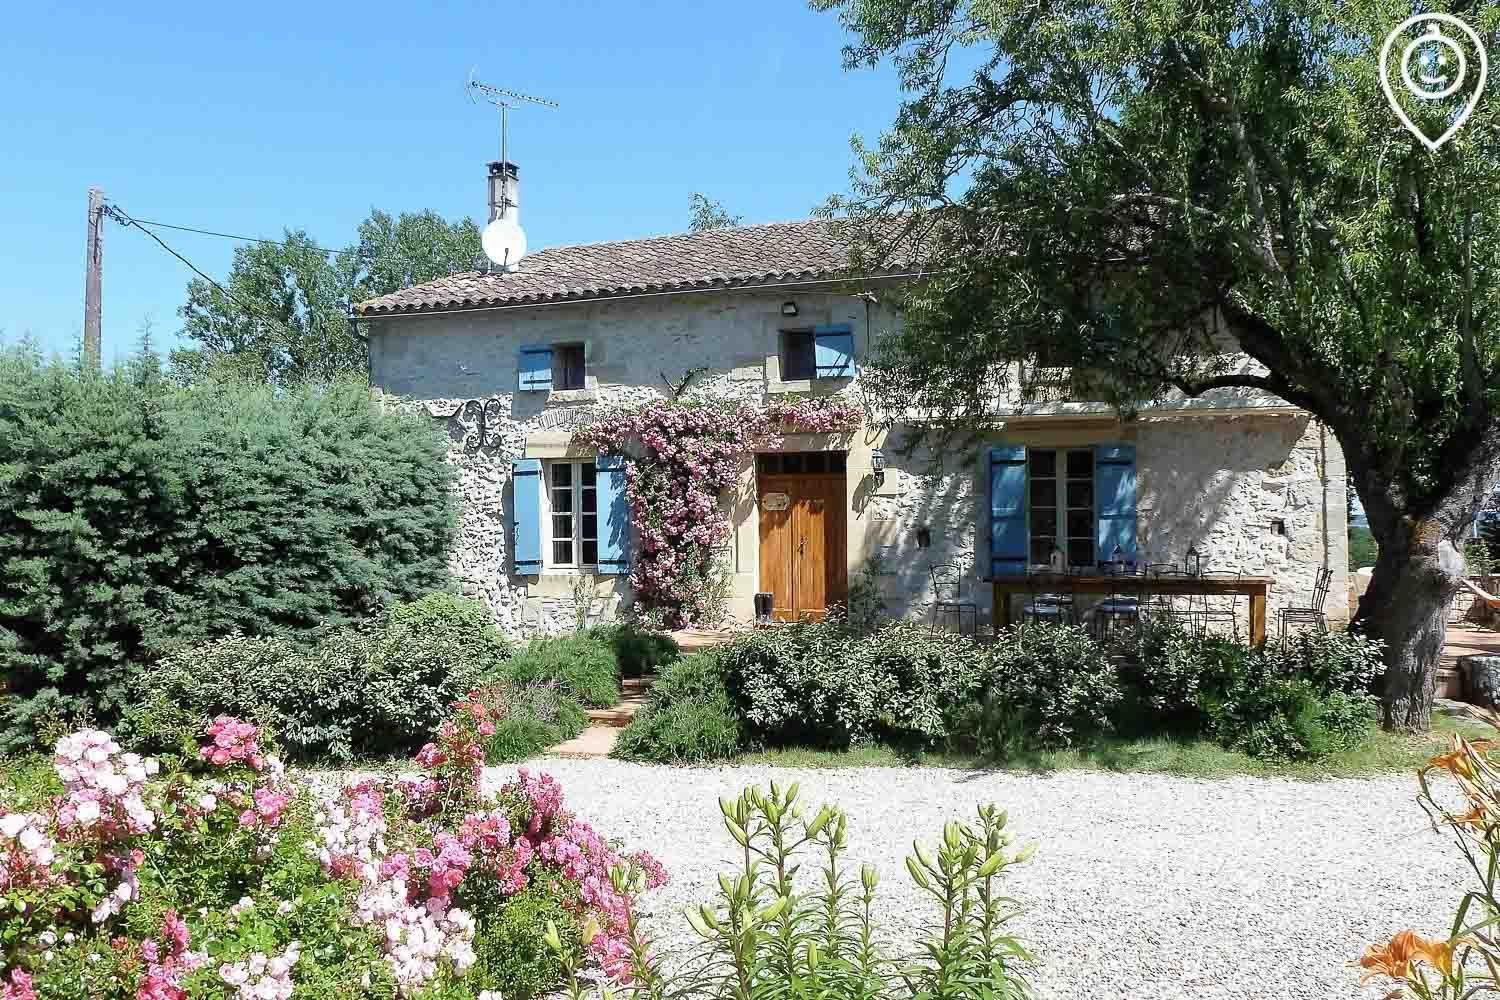 French Gites, Family Country Holiday Cottages & Gites with Pools -   18 holiday Home france ideas